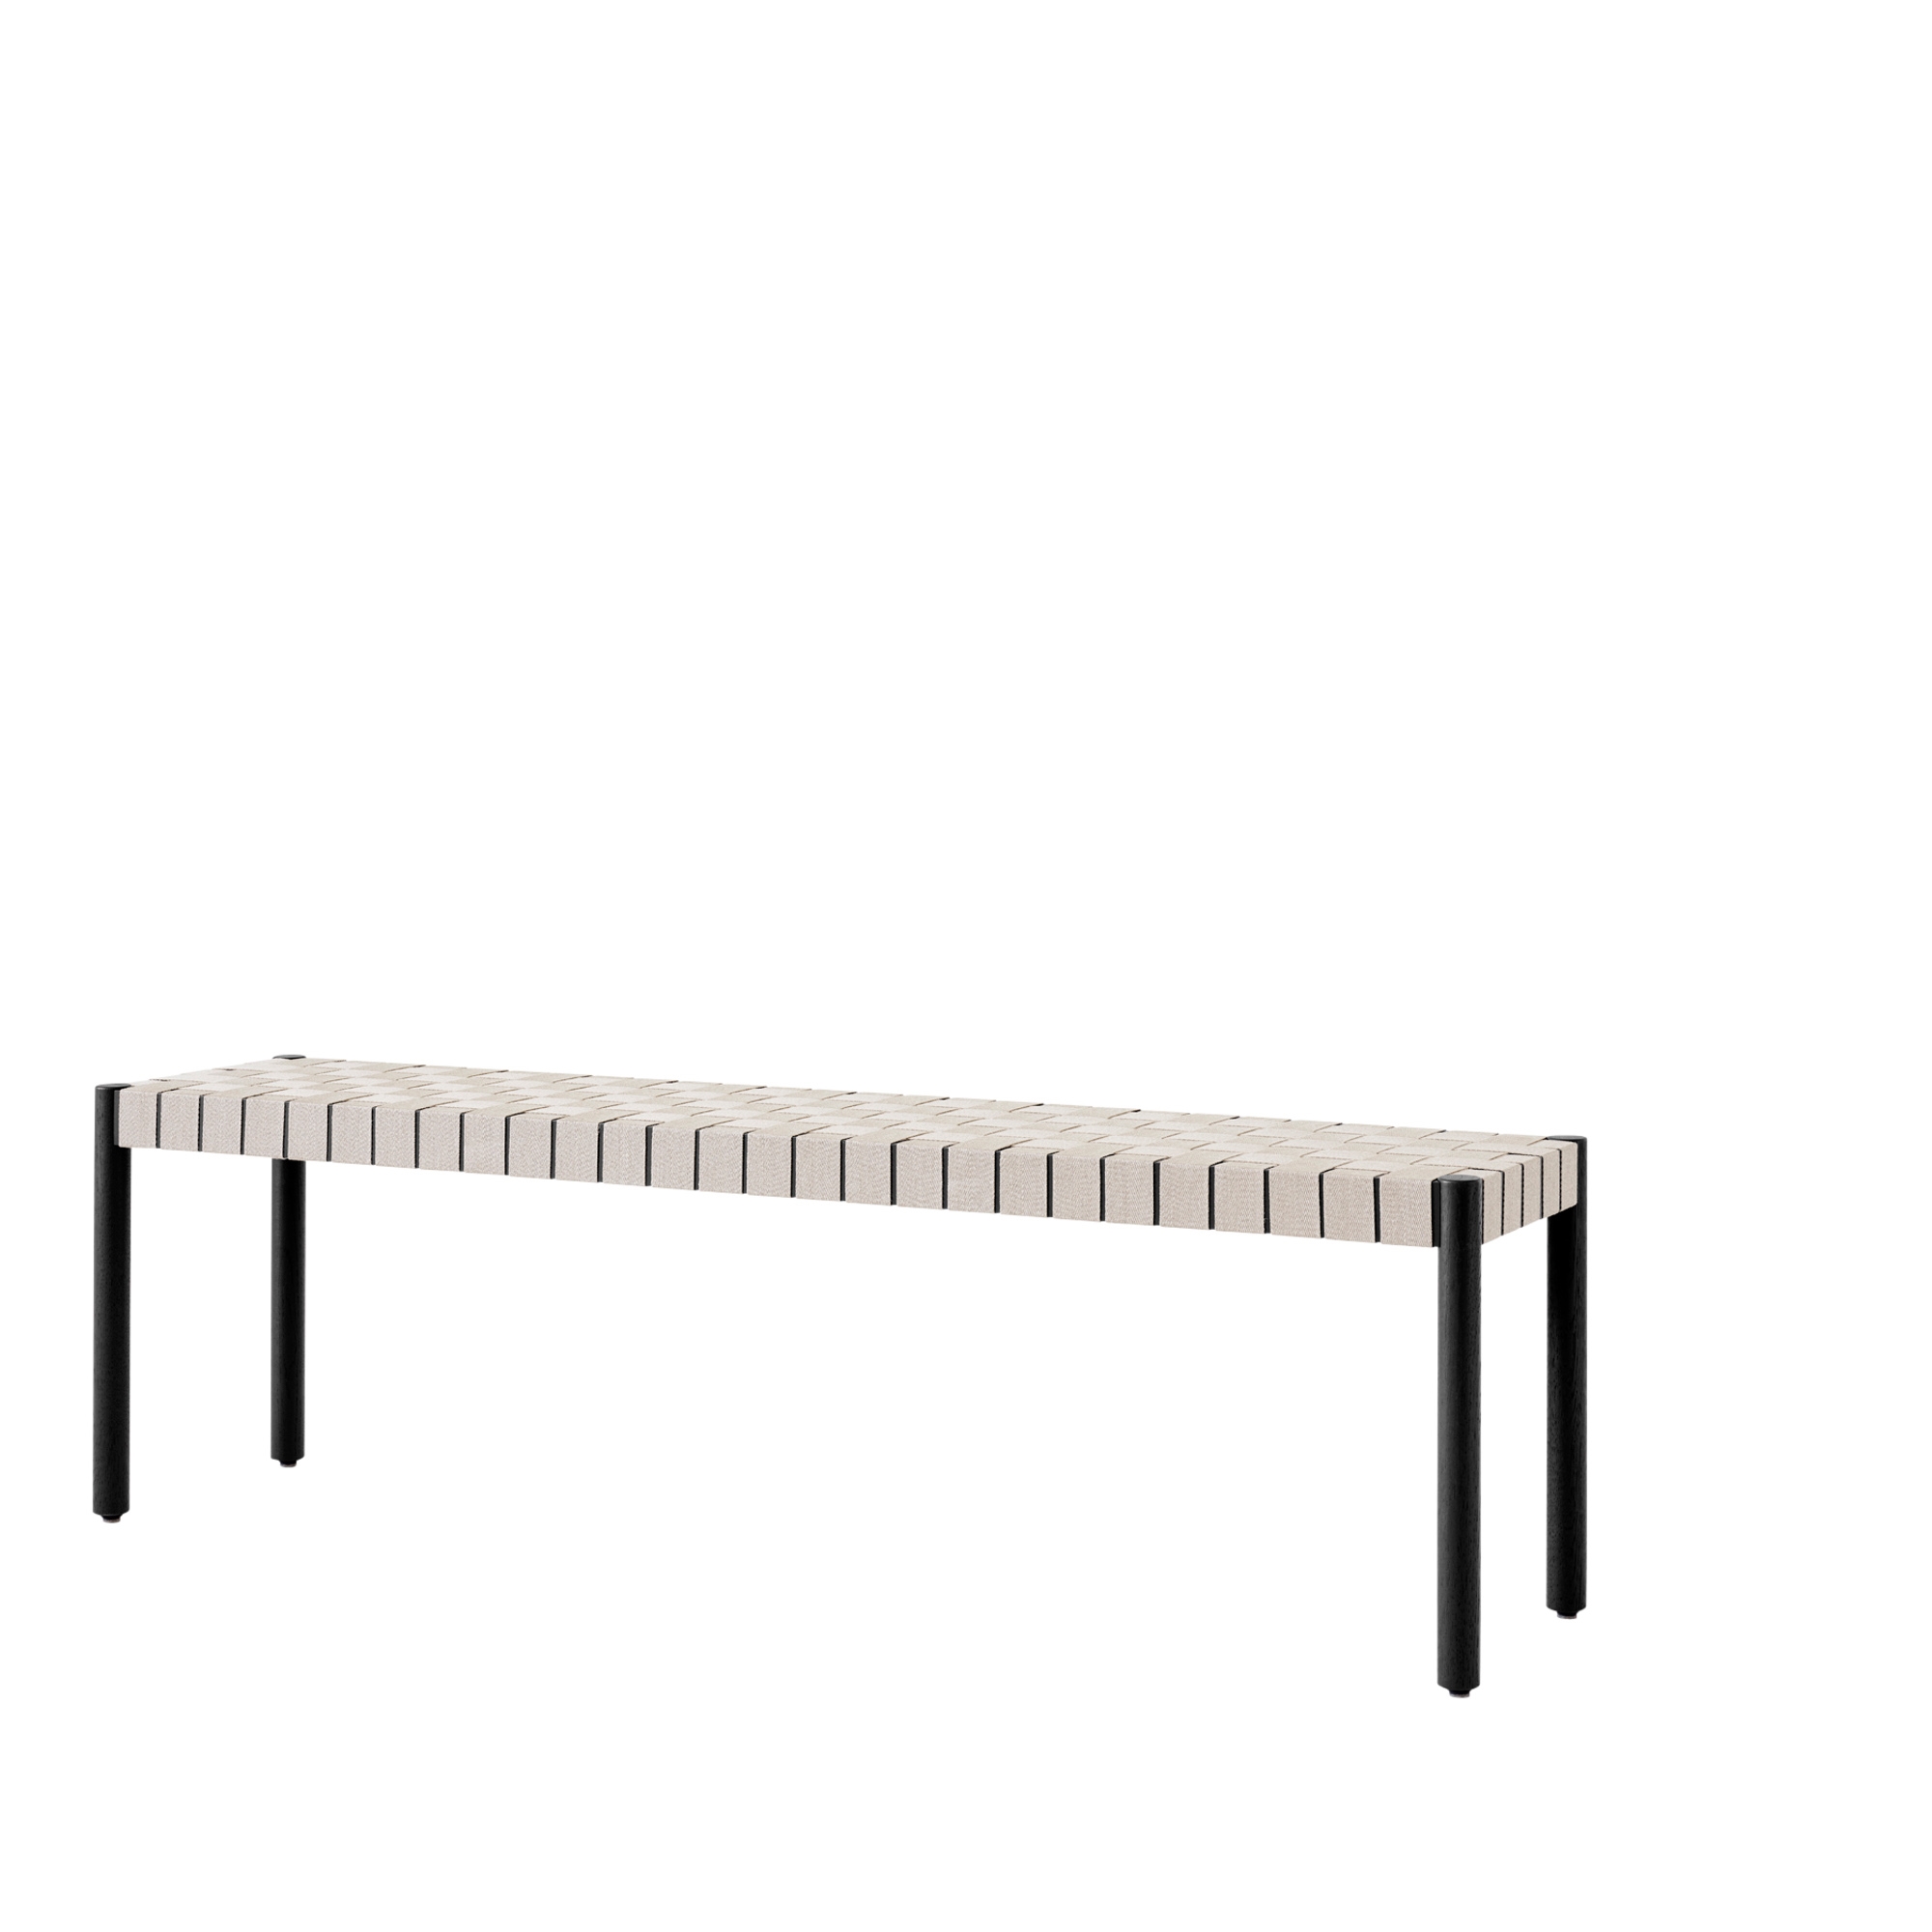 &Tradition Betty TK5 Bench Large Black/ Natural